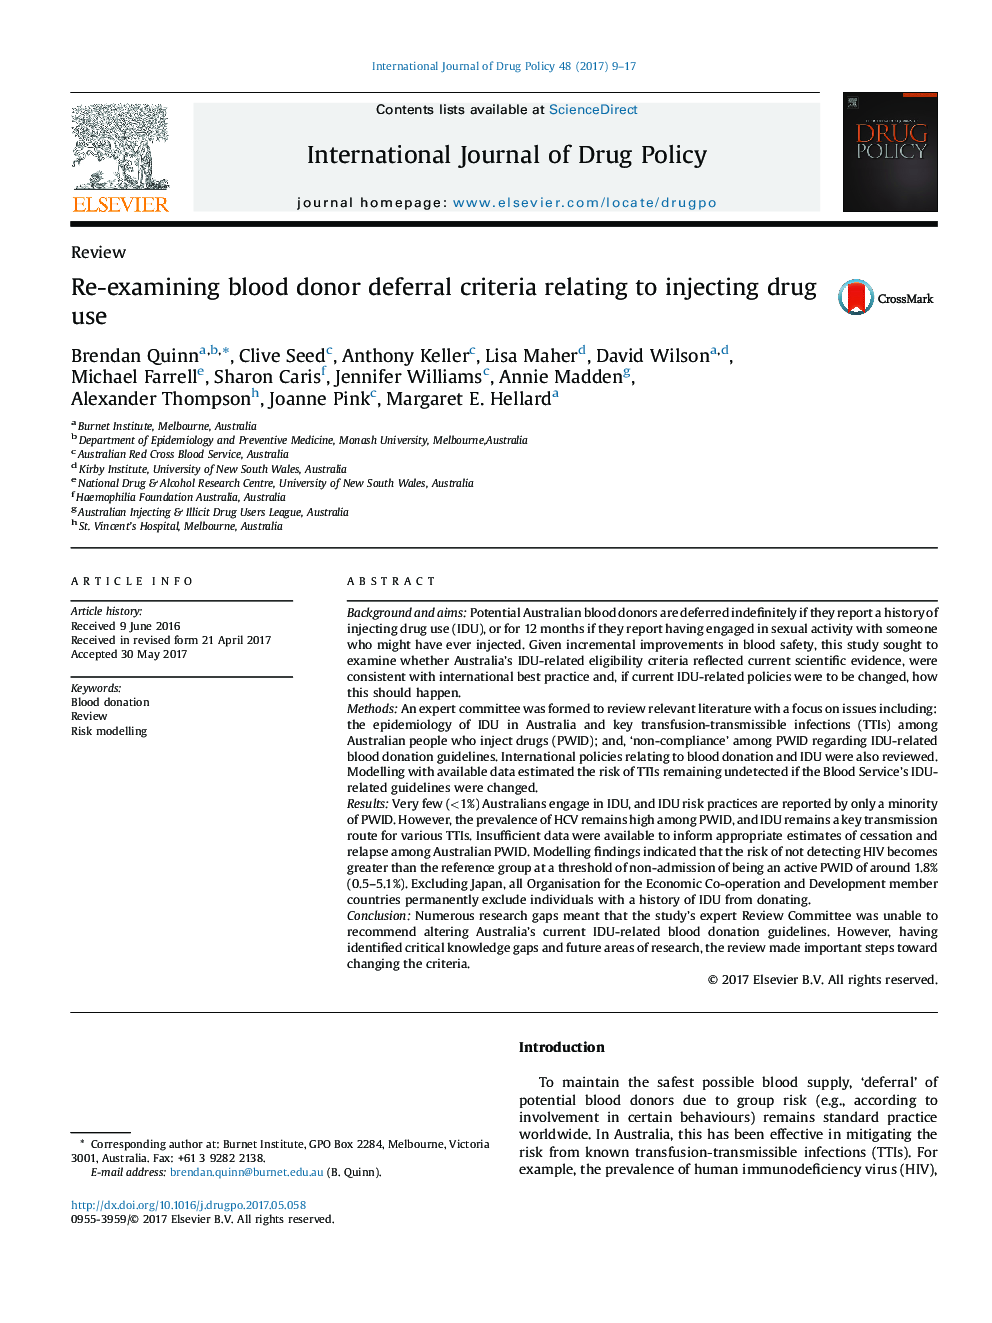 Re-examining blood donor deferral criteria relating to injecting drug use